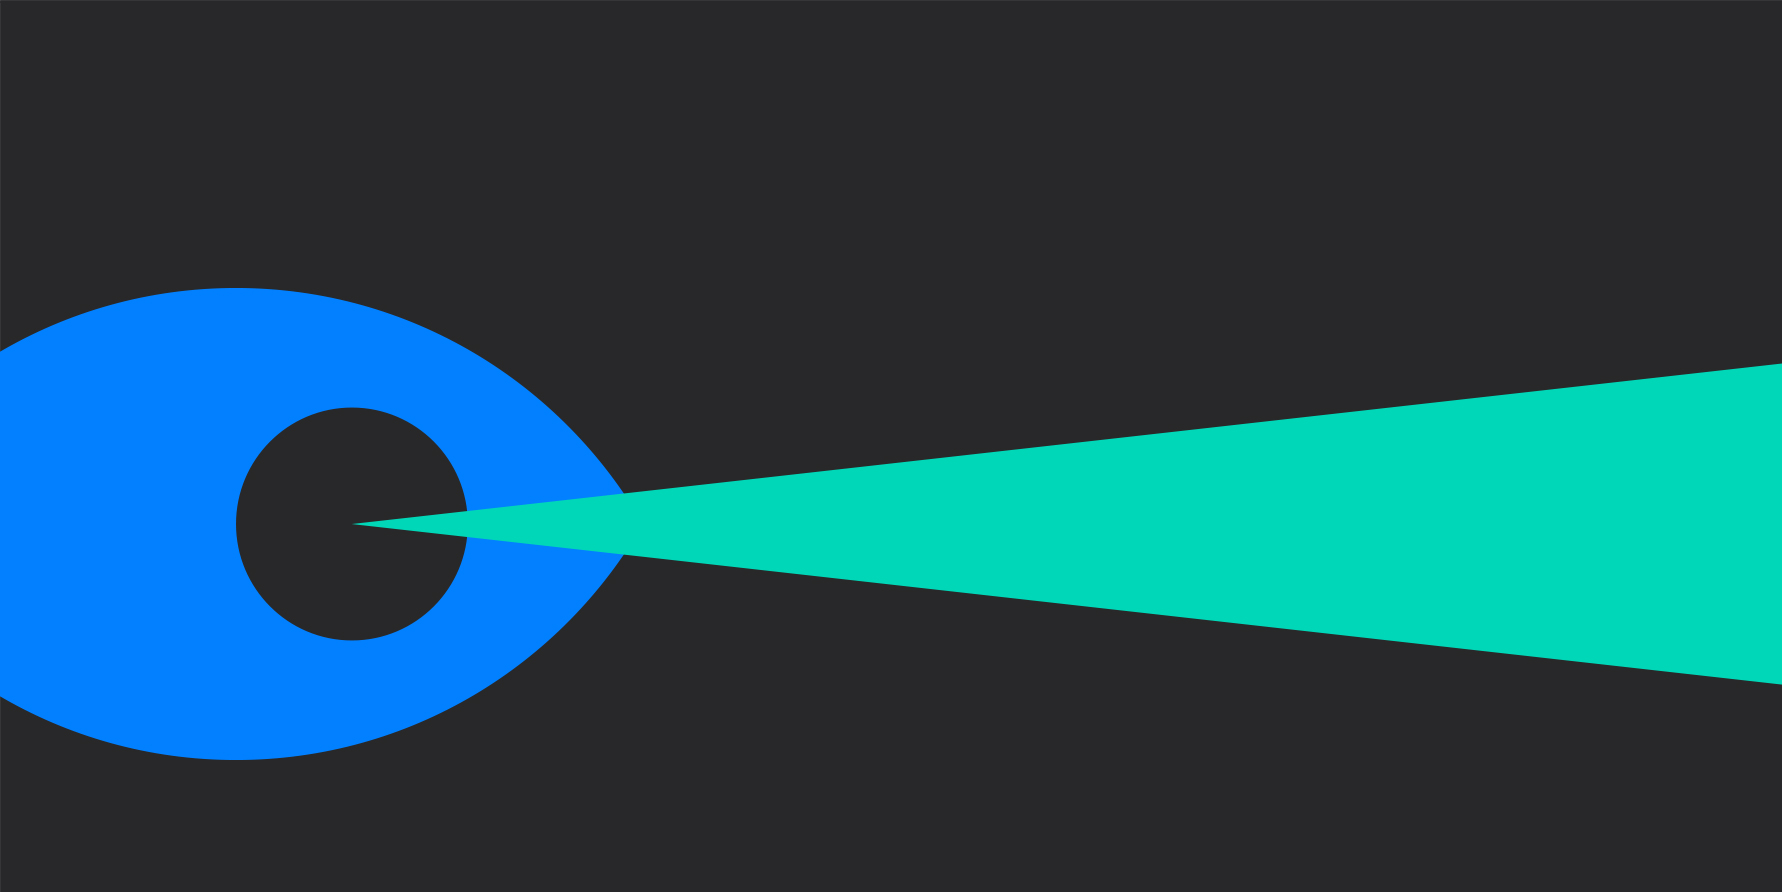 Stylistic illustration of a forecasting beam coming out of an eye